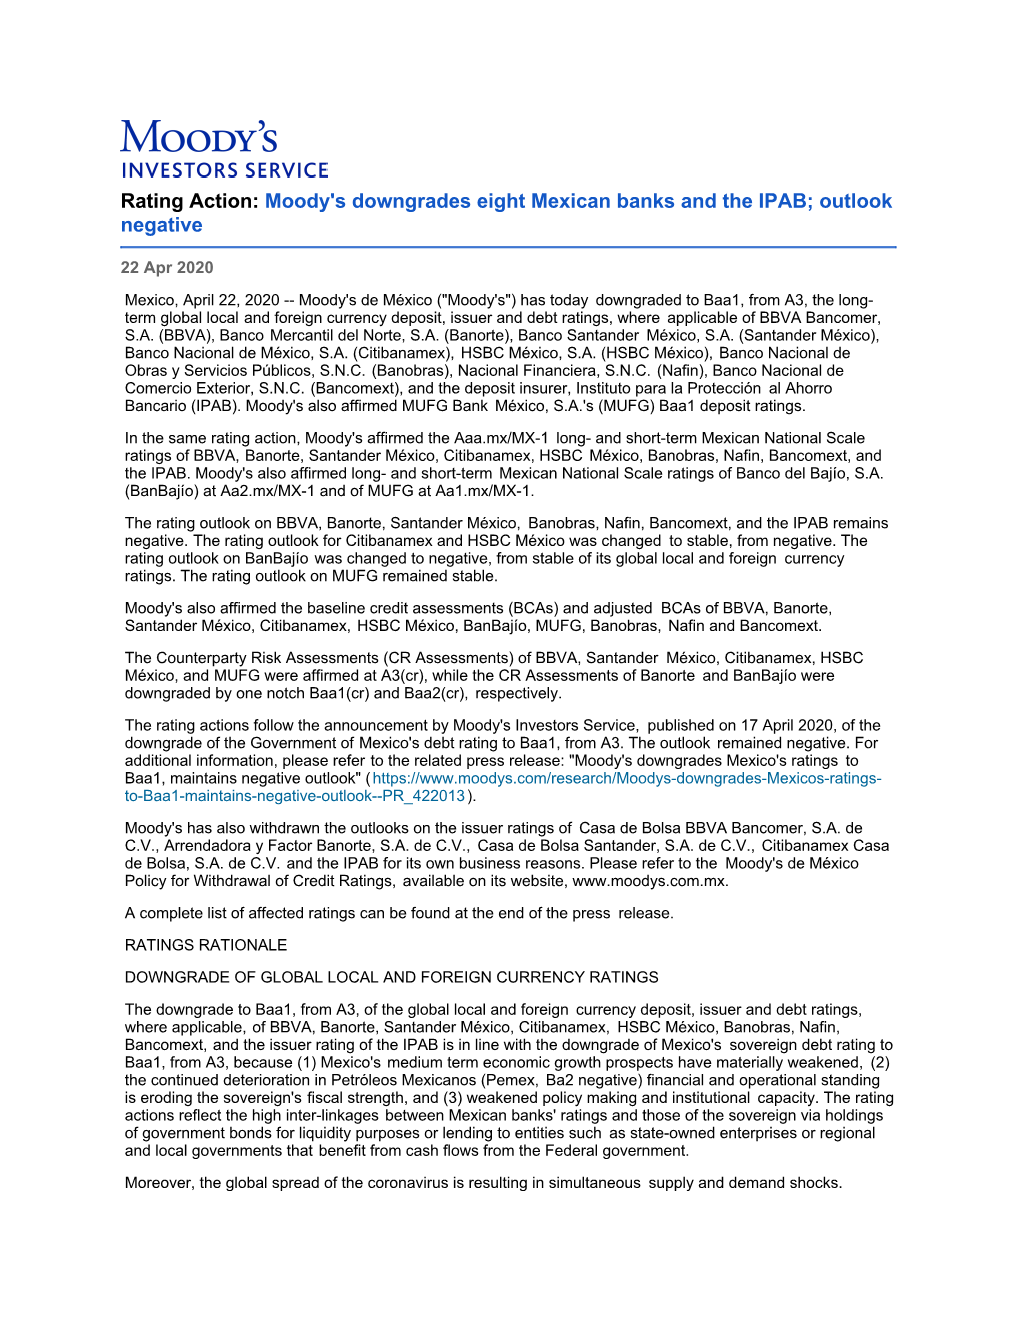 Rating Action: Moody's Downgrades Eight Mexican Banks and the IPAB; Outlook Negative